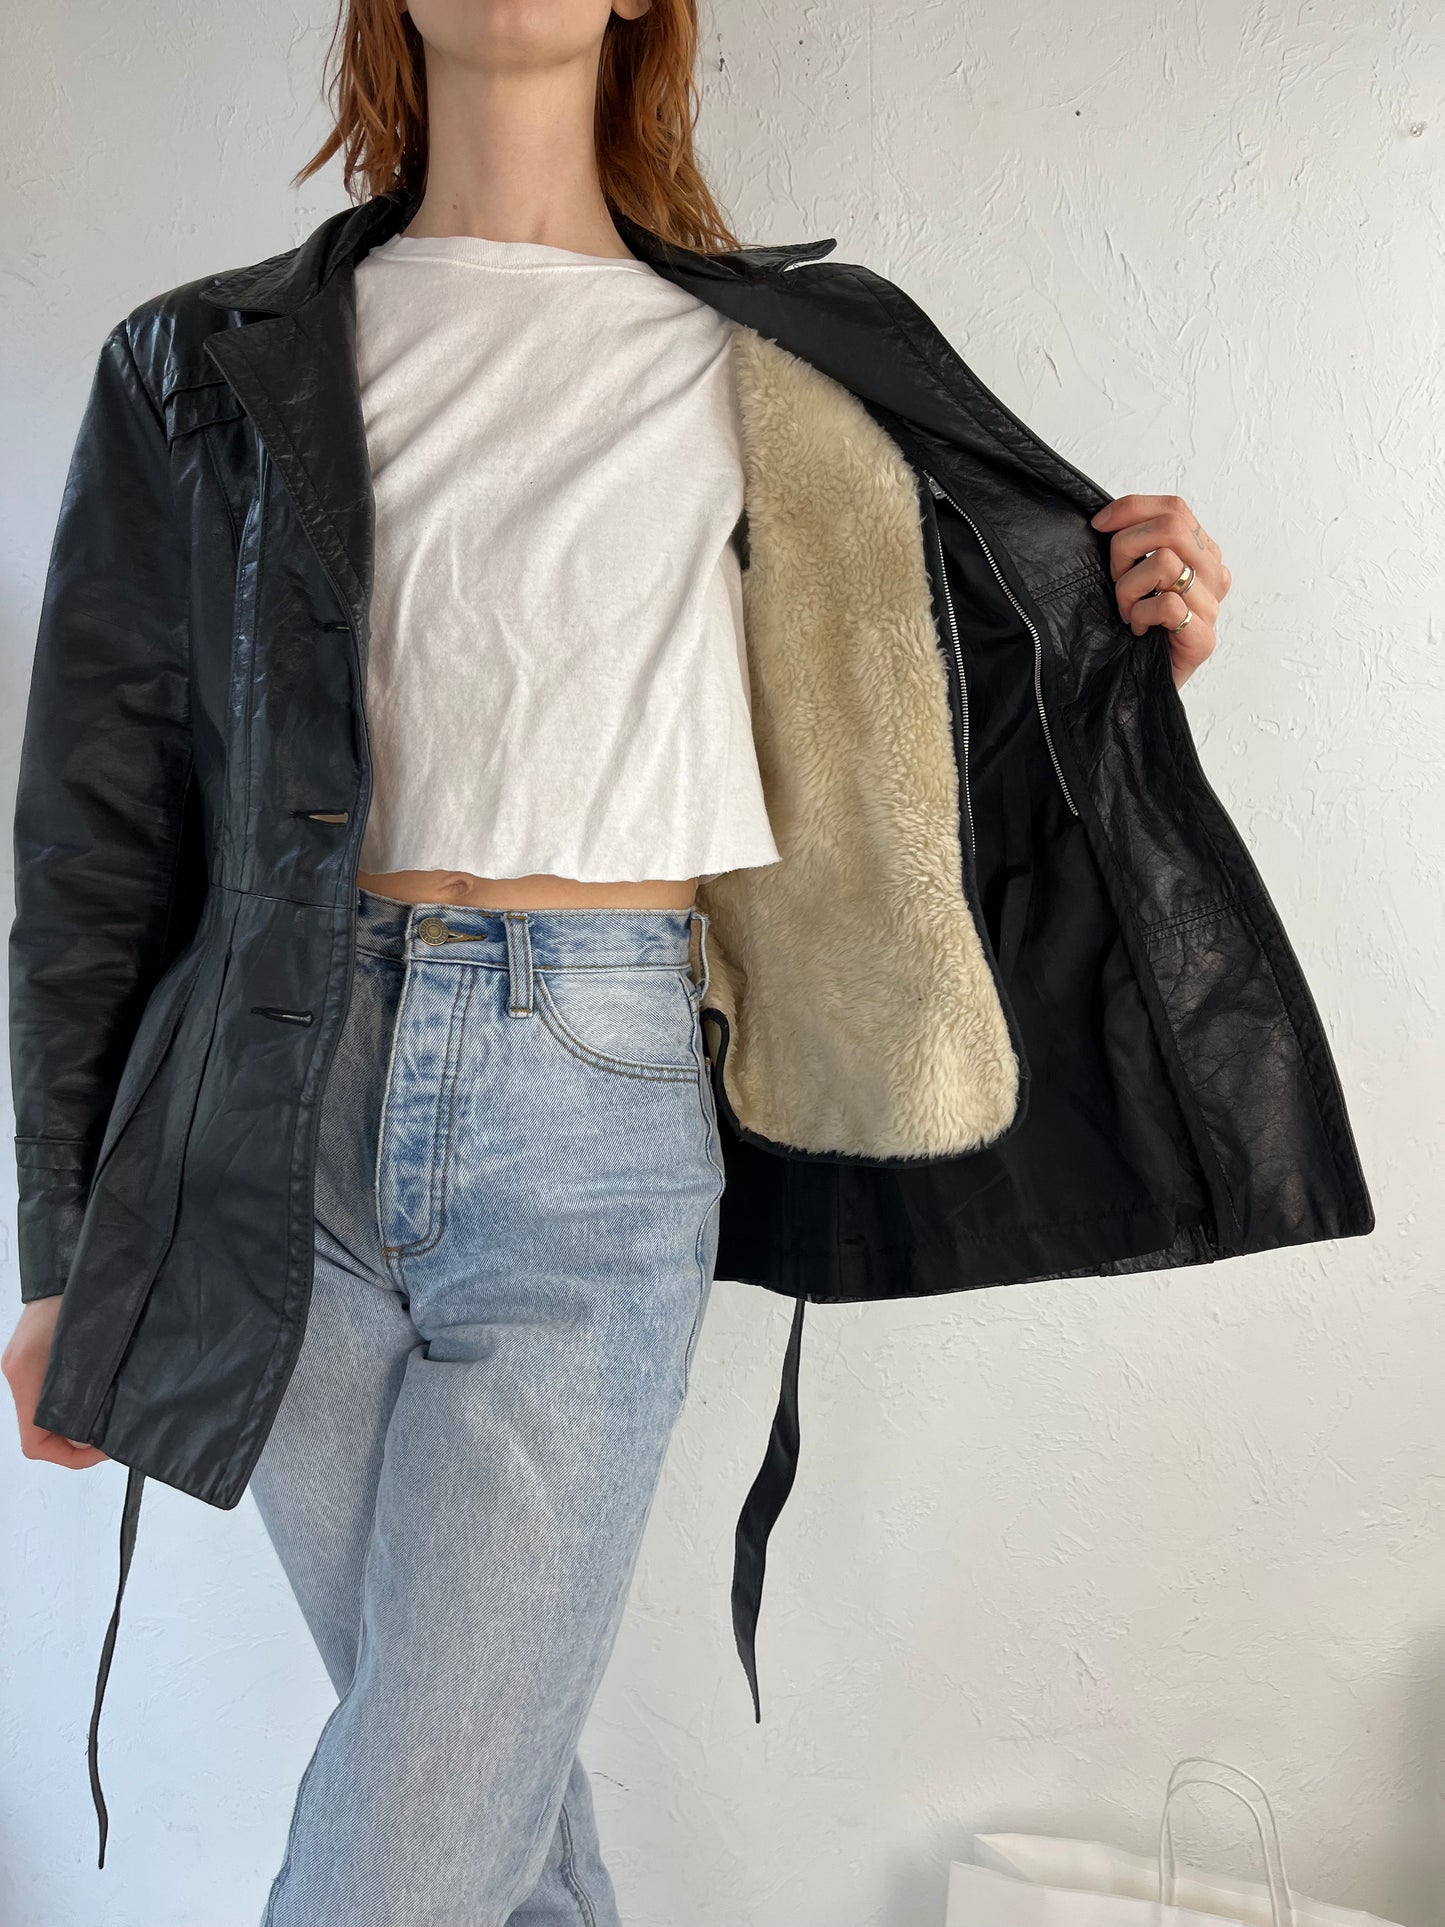 80s 'Sears' Black Leather Jacket w/ Zip Out Lining / Medium